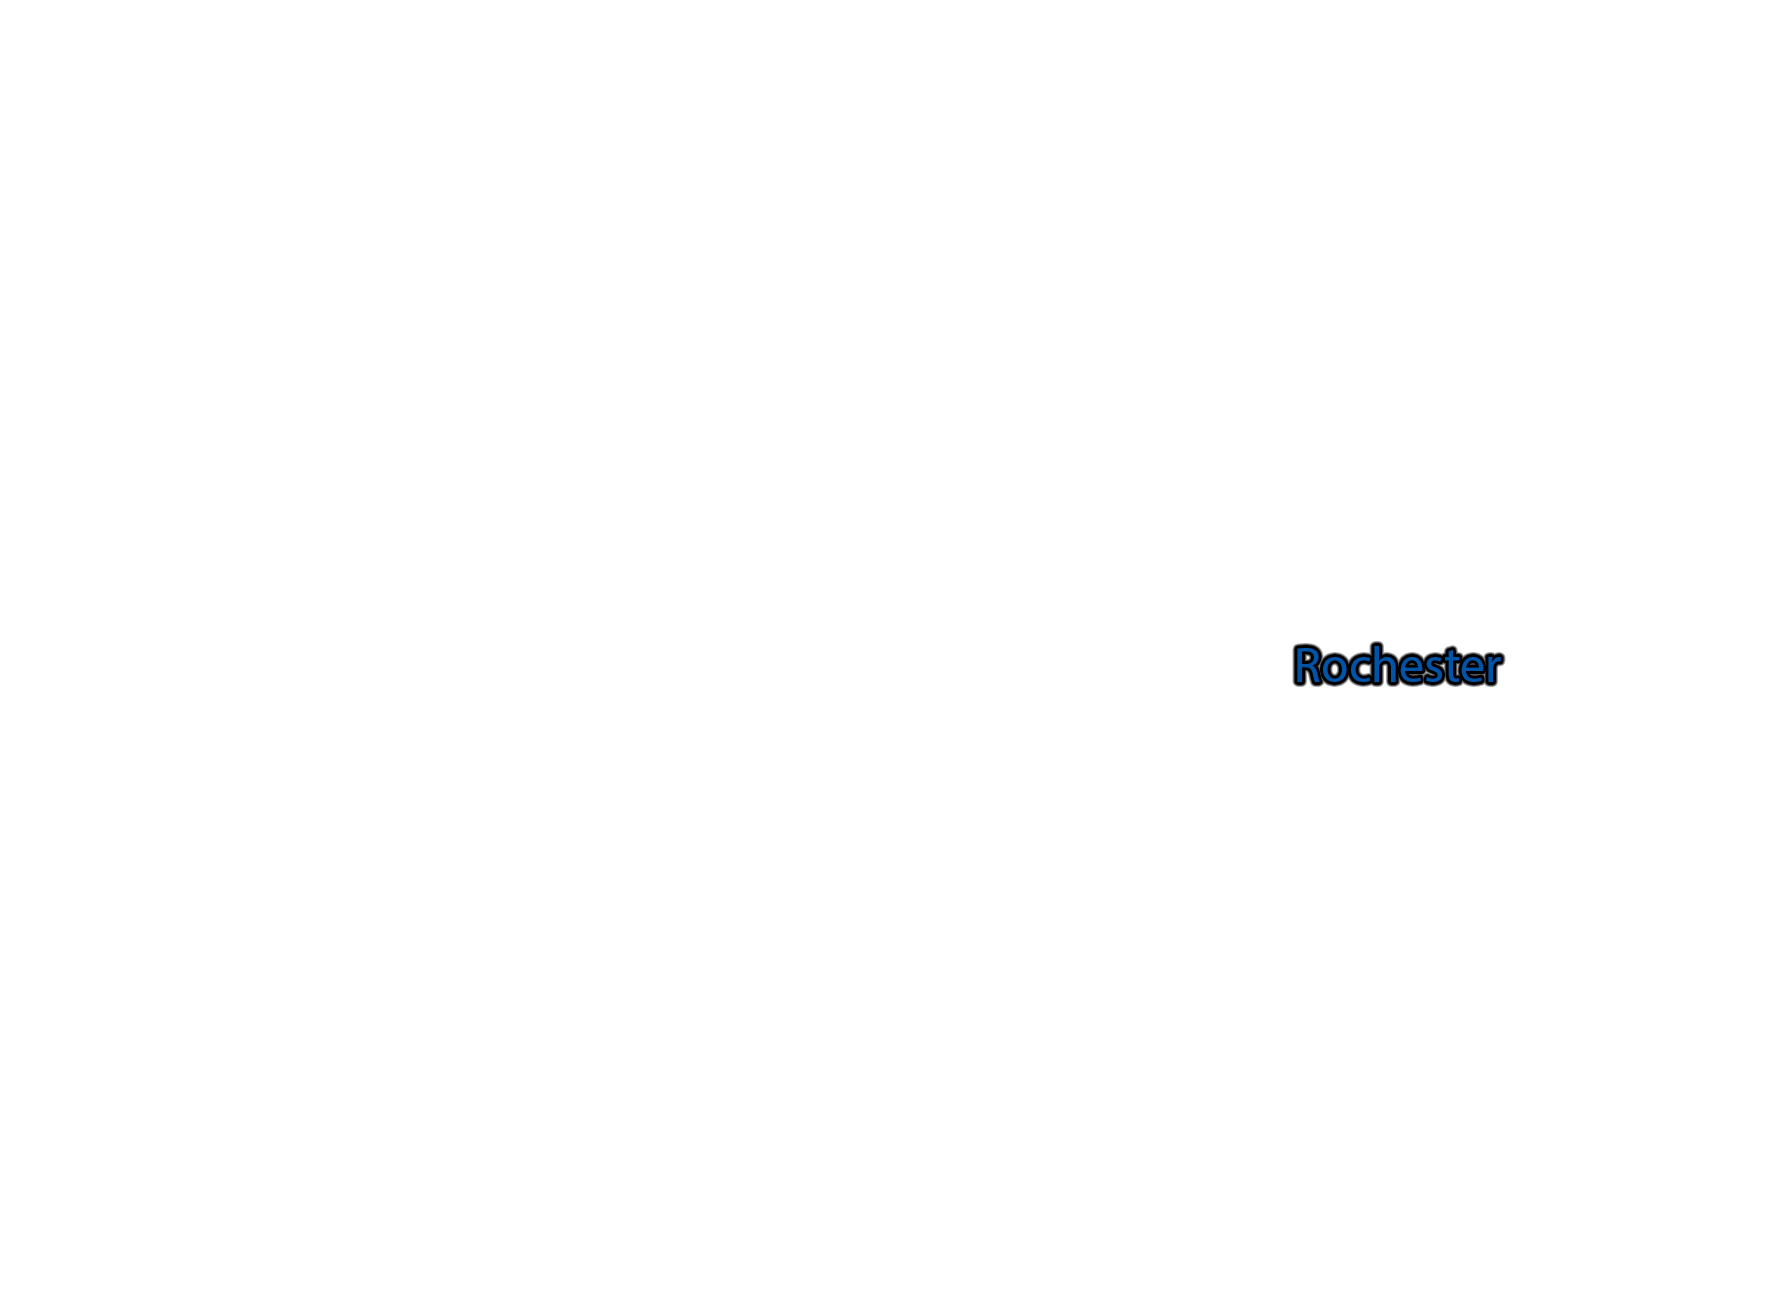 Rochester label with glow